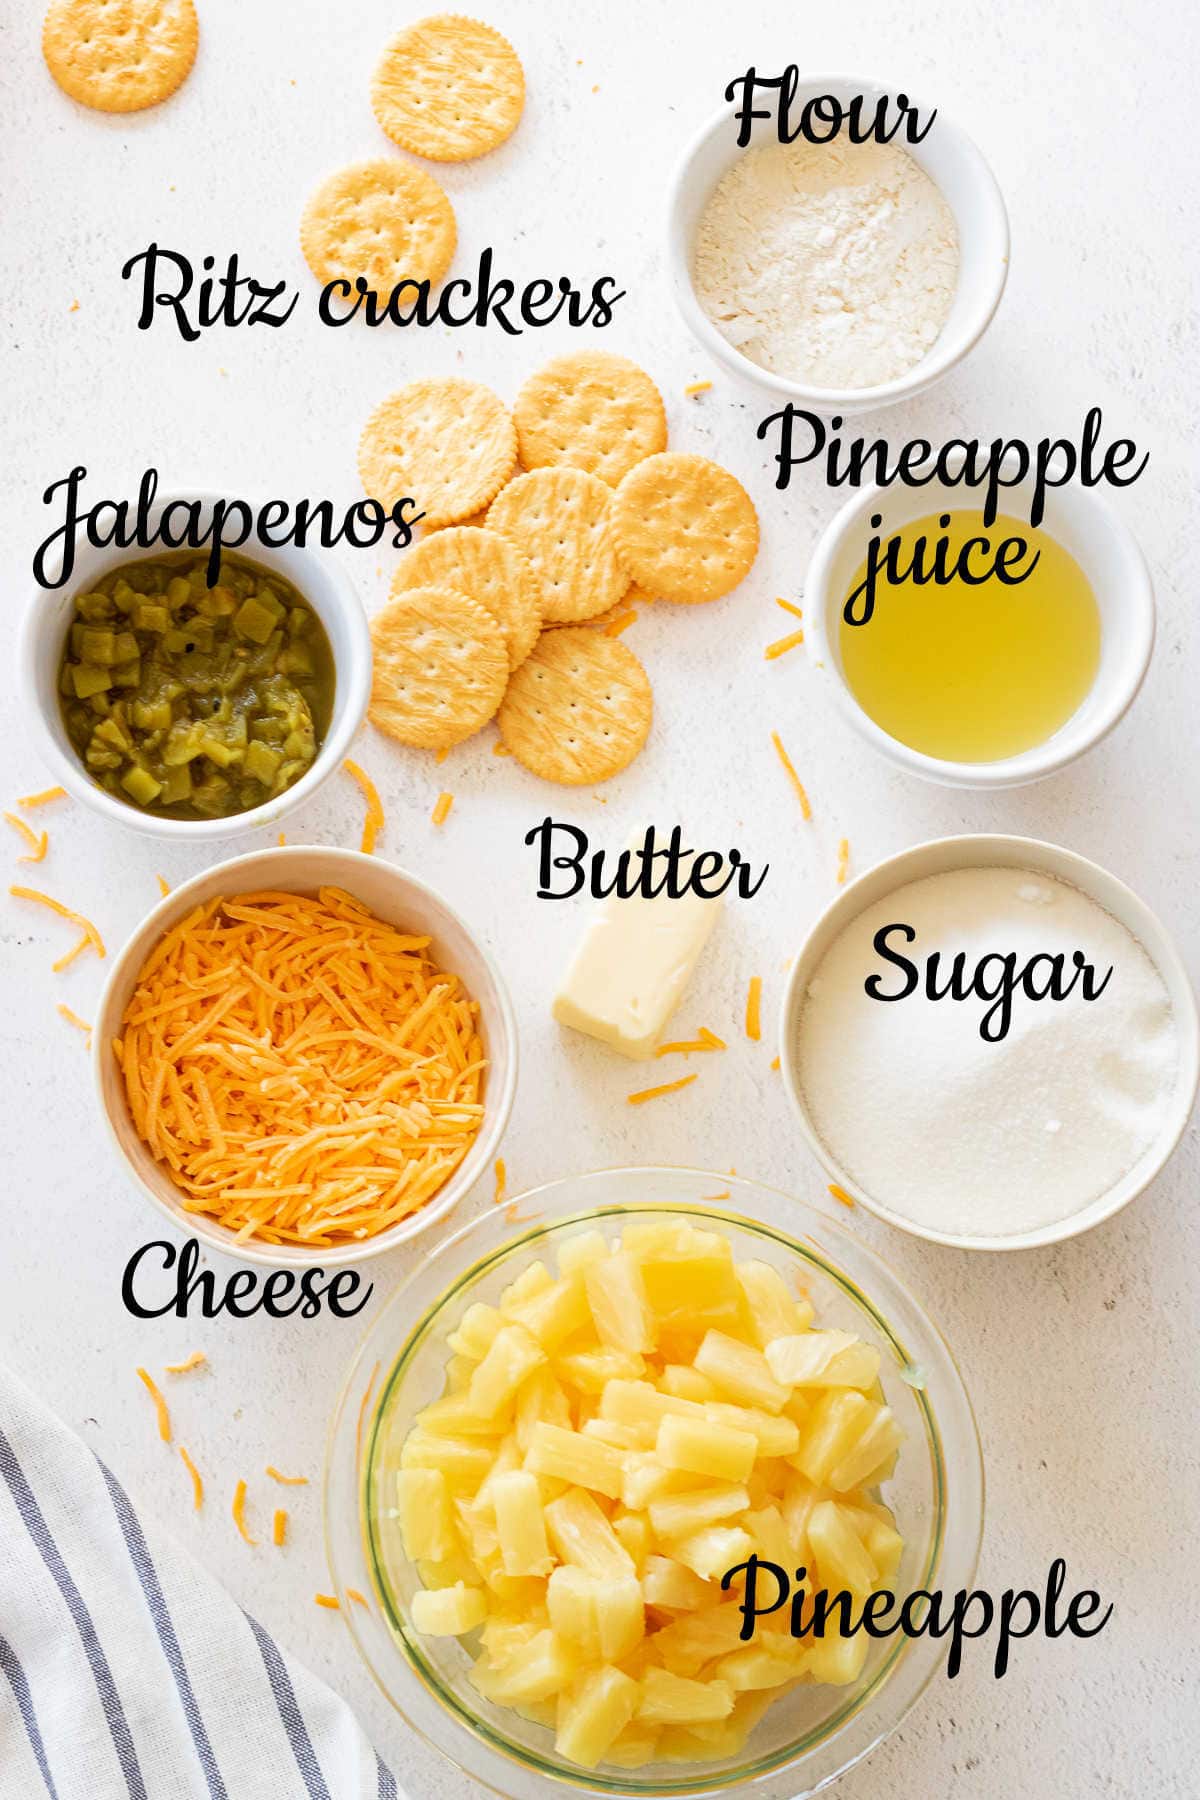 Labeled ingredients for the pineapple casserole recipe.